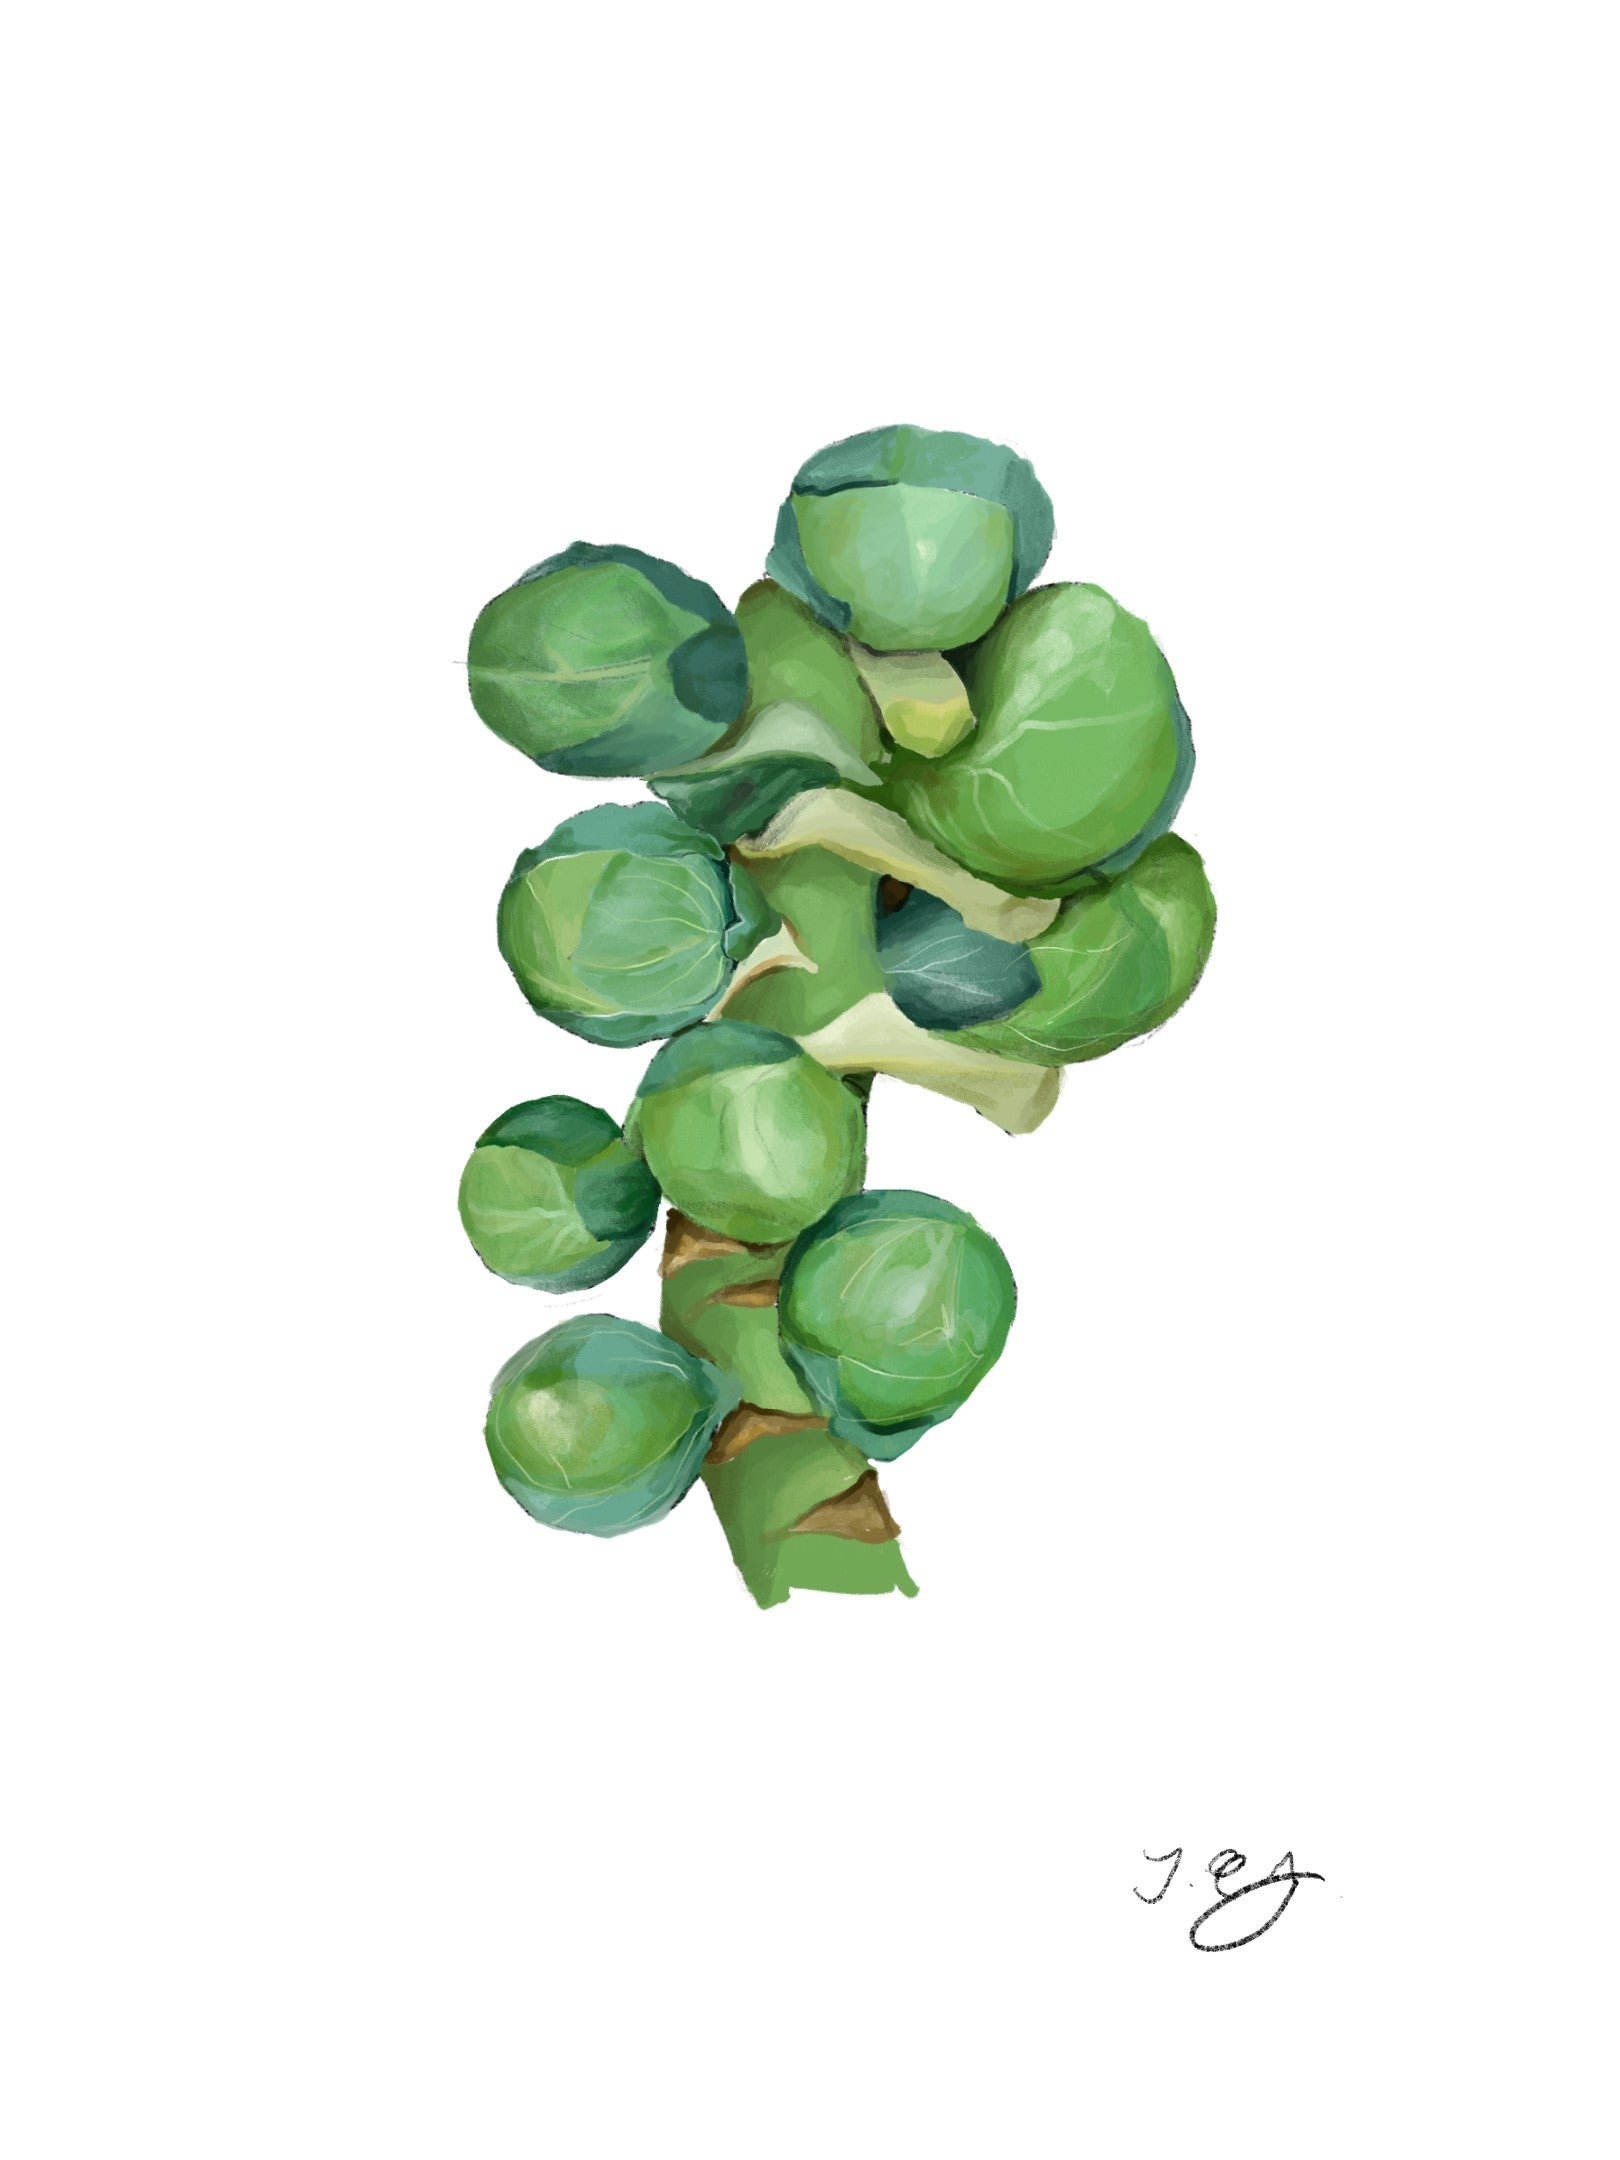 Brussels Sprouts - Loose 500g